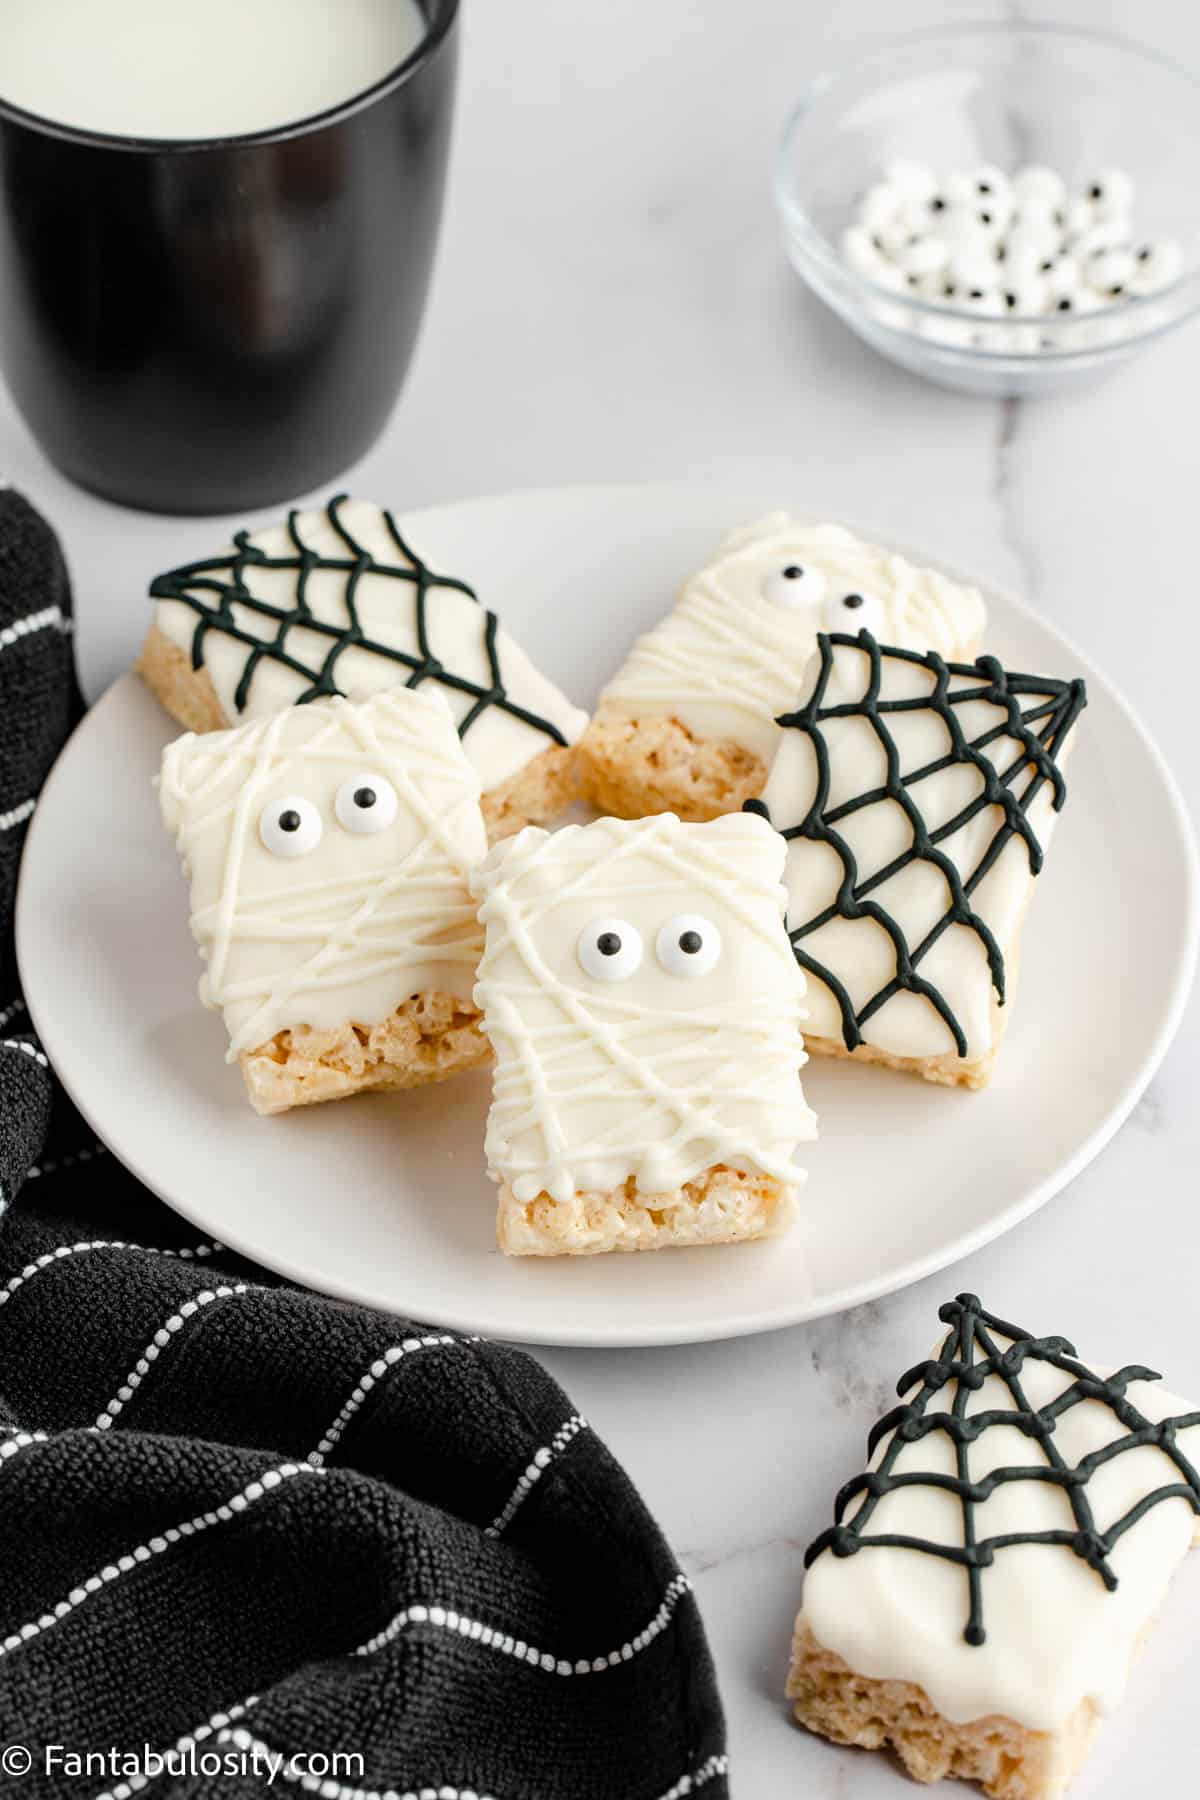 A plate full of Mummy Rice Krispie Treats is displayed with a glass of milk and another krispie treat is in the foreground beside a decorative black and white towel